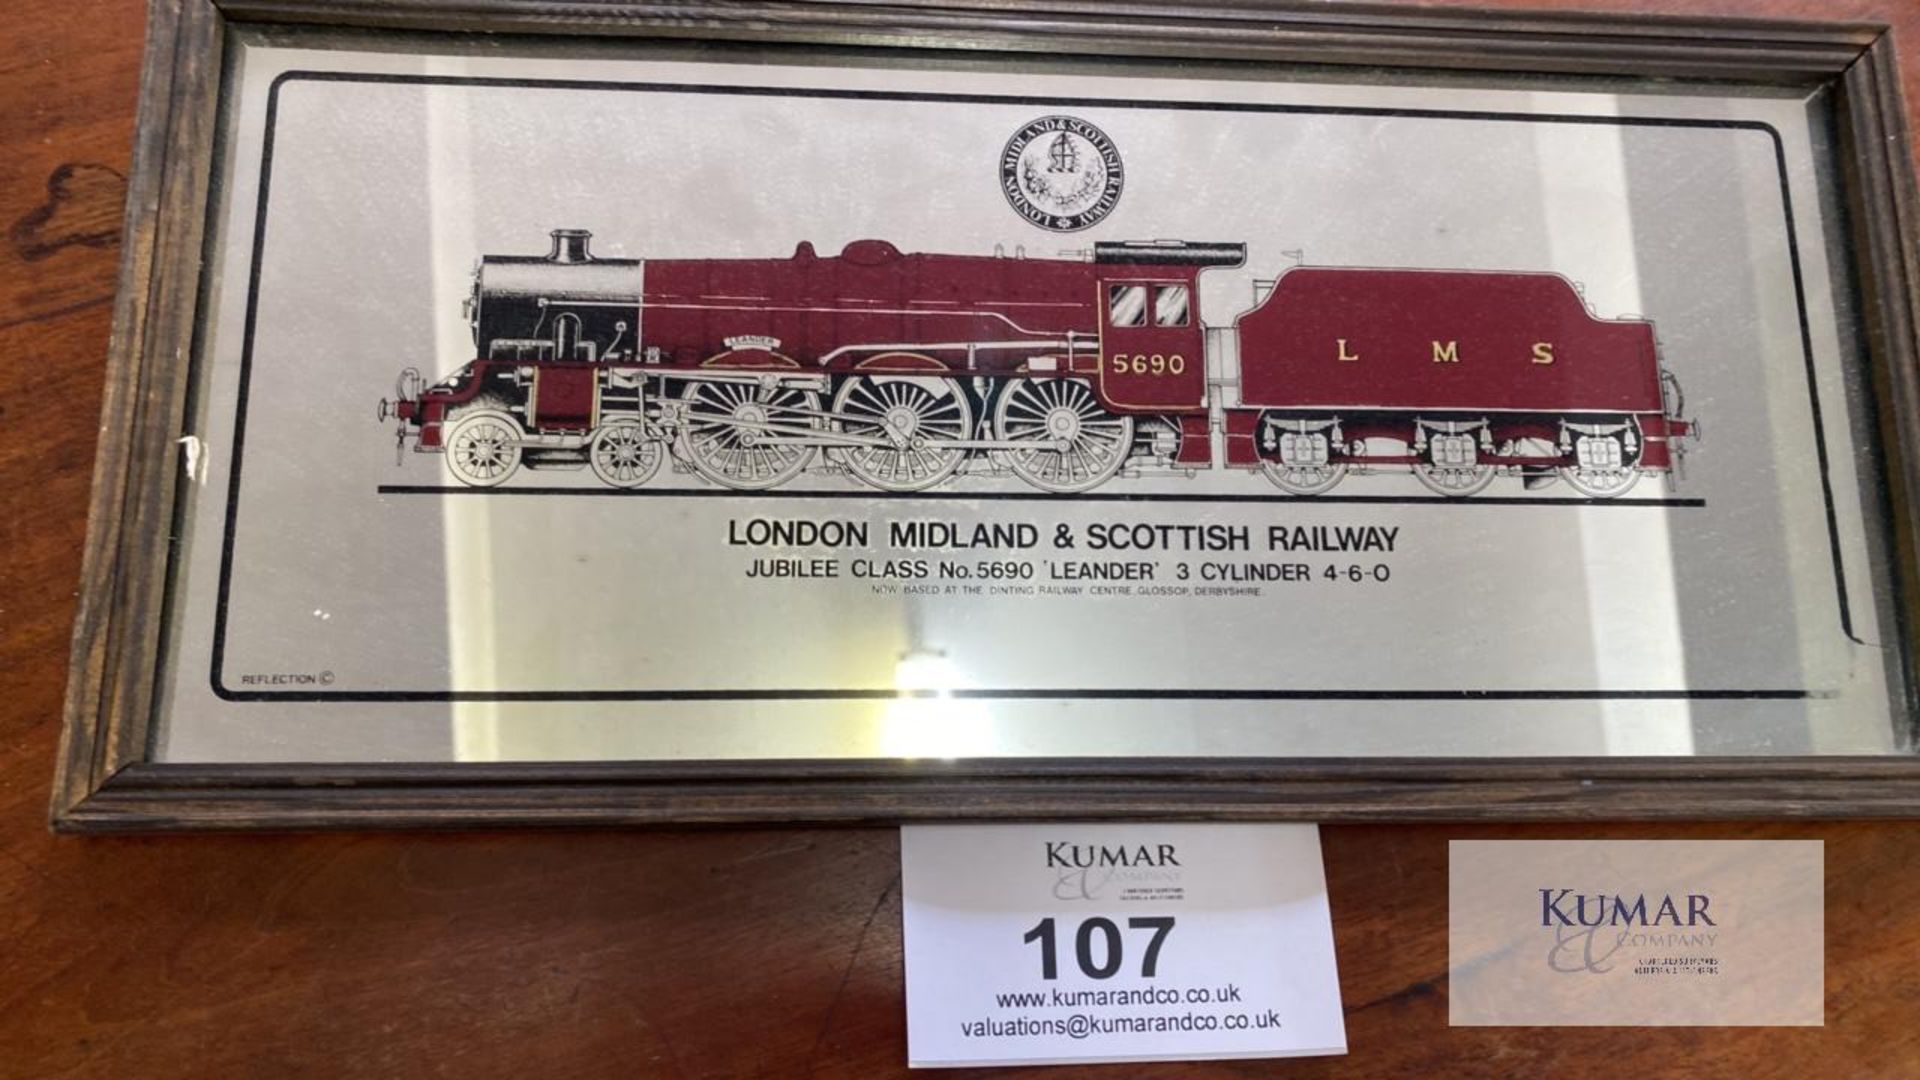 Train pictures in frames - Image 16 of 18